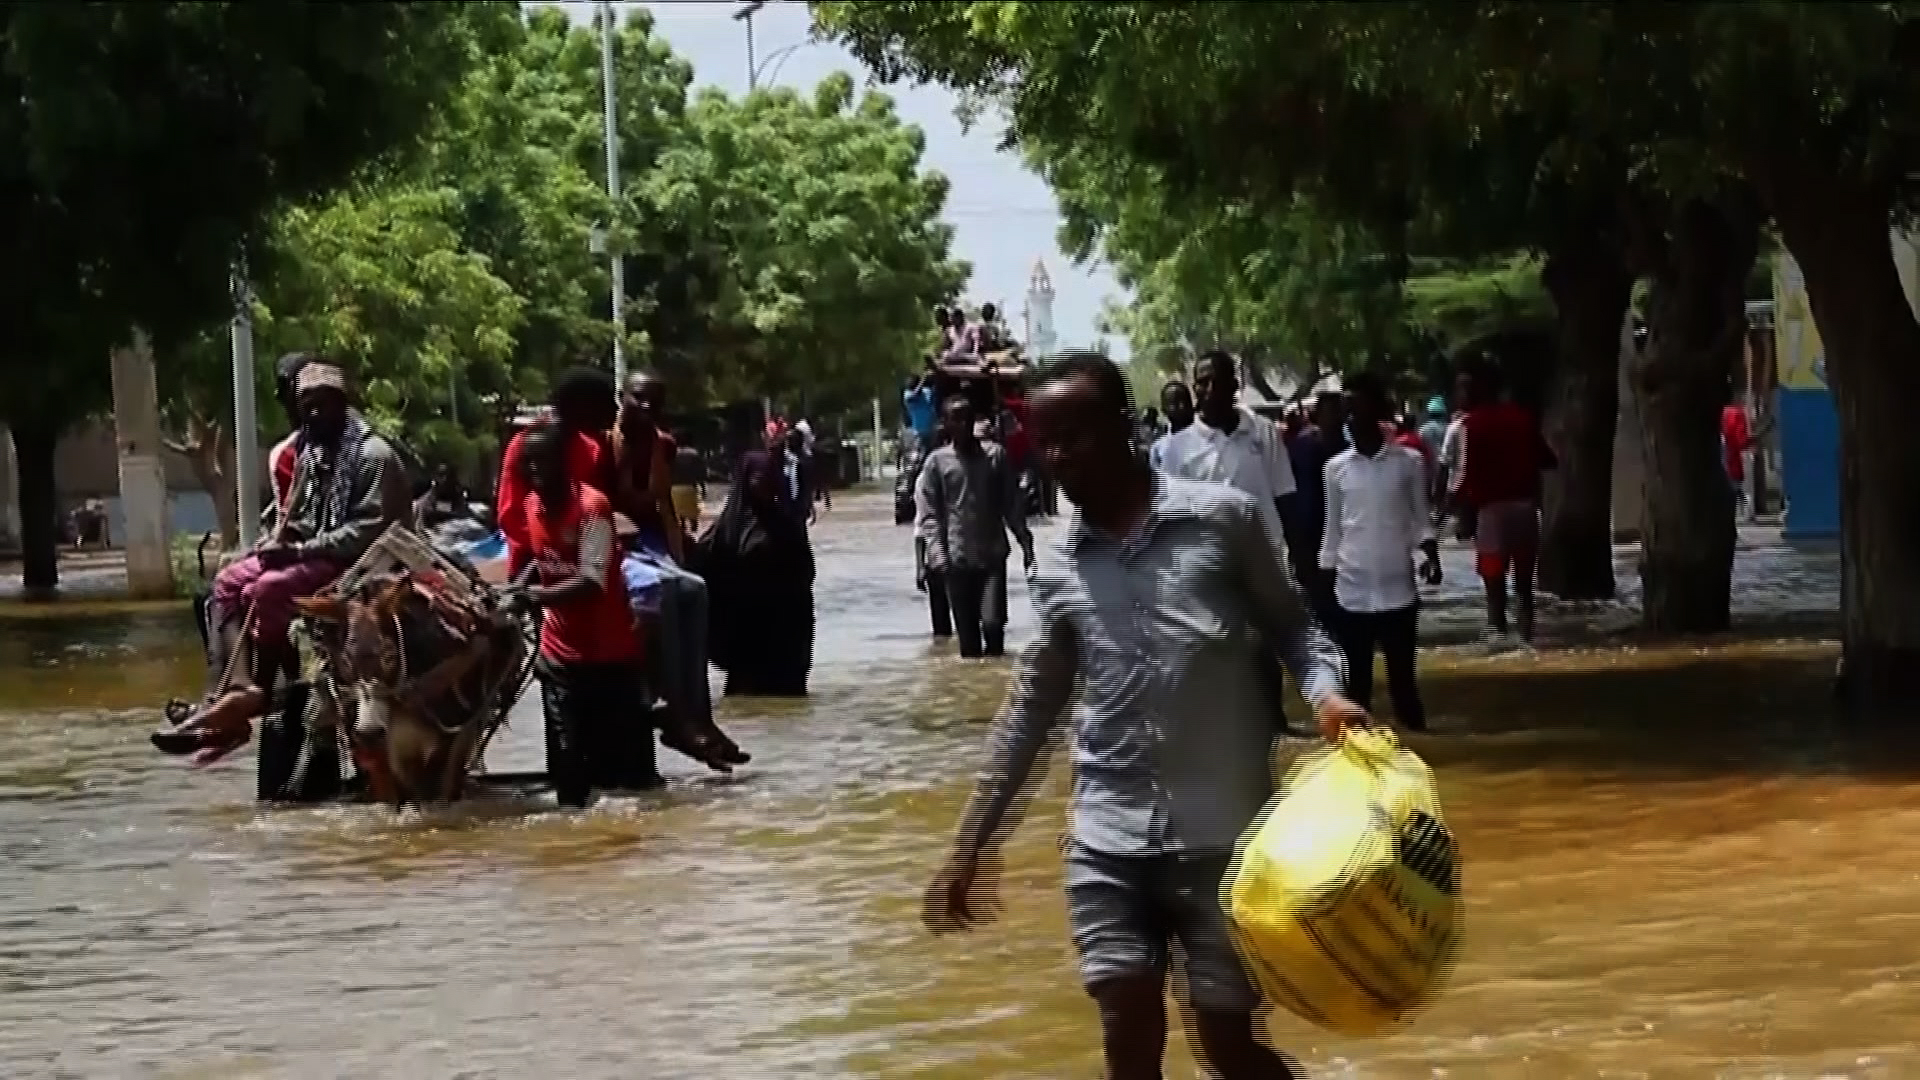 ‘There’s Water Everywhere’: Flooding In Somalia Pushes Minnesotans To Take Action - WCCO | CBS Minnesota